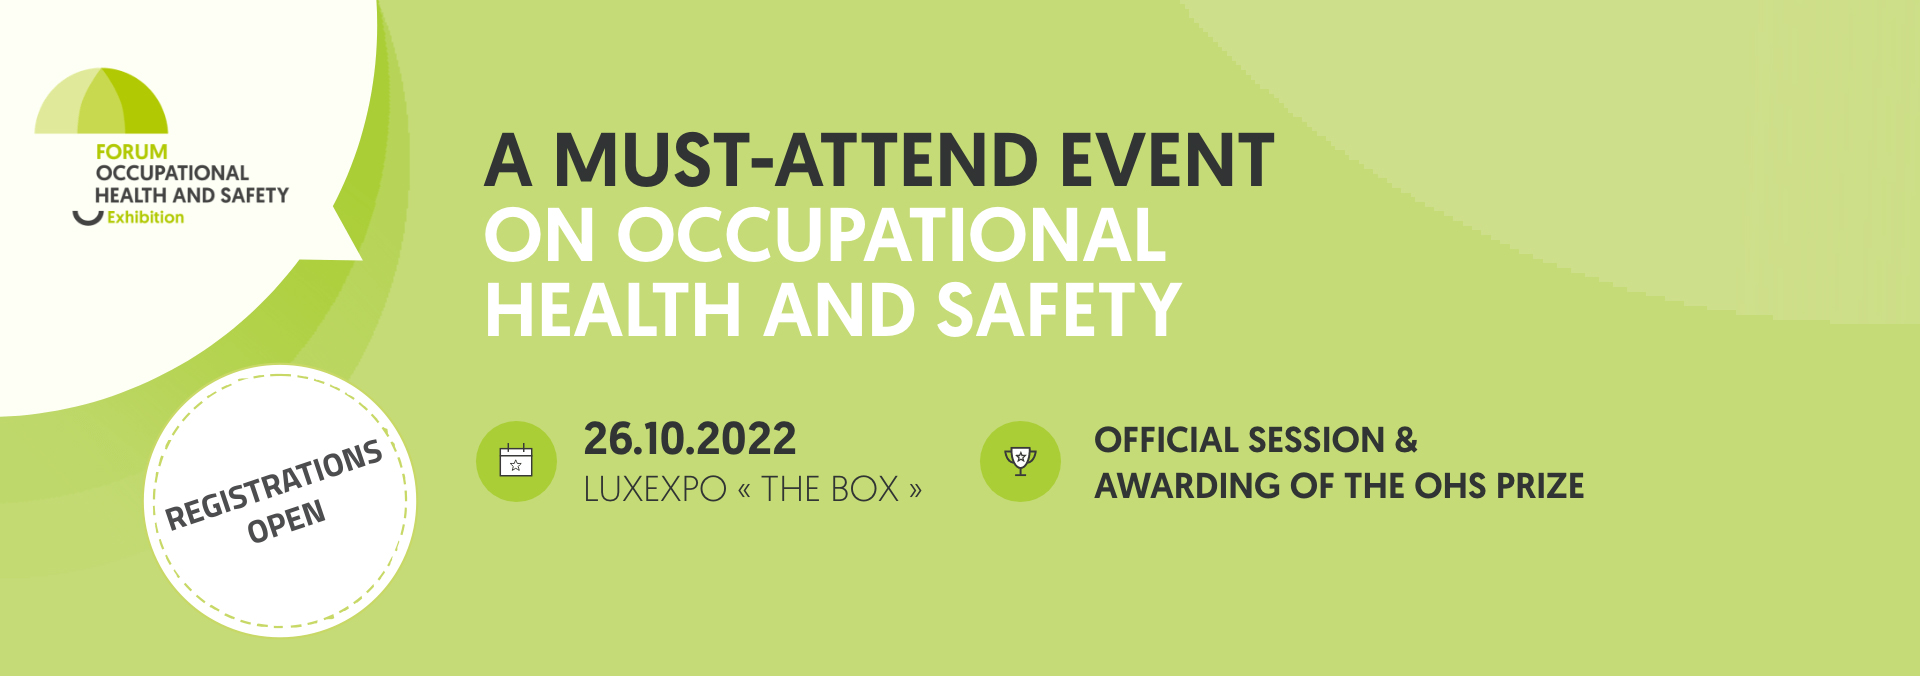 Occupational Health and Safety Forum 2022